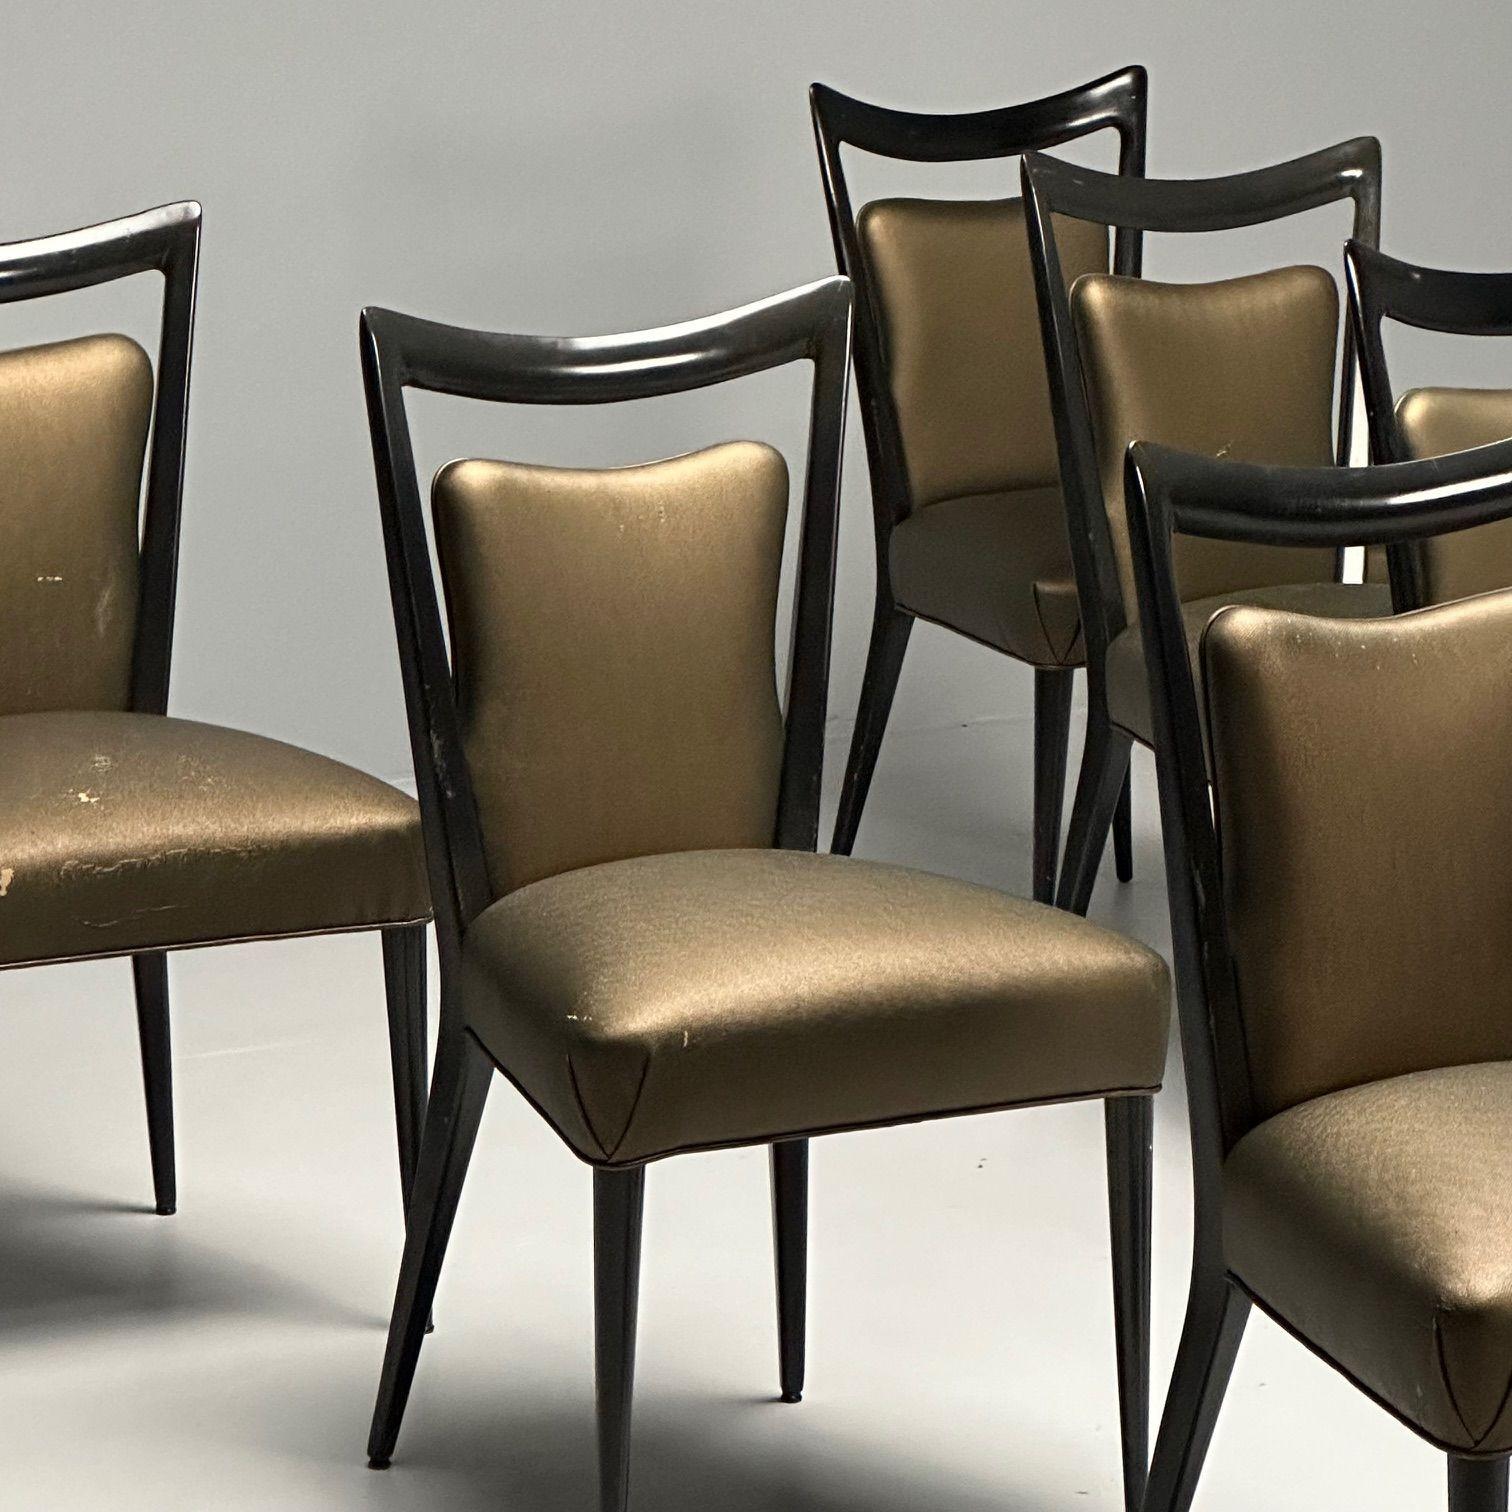 Fabric Melchiorre Bega, Italian Mid-Century Modern, Eight Dining Chairs, Black Lacquer For Sale